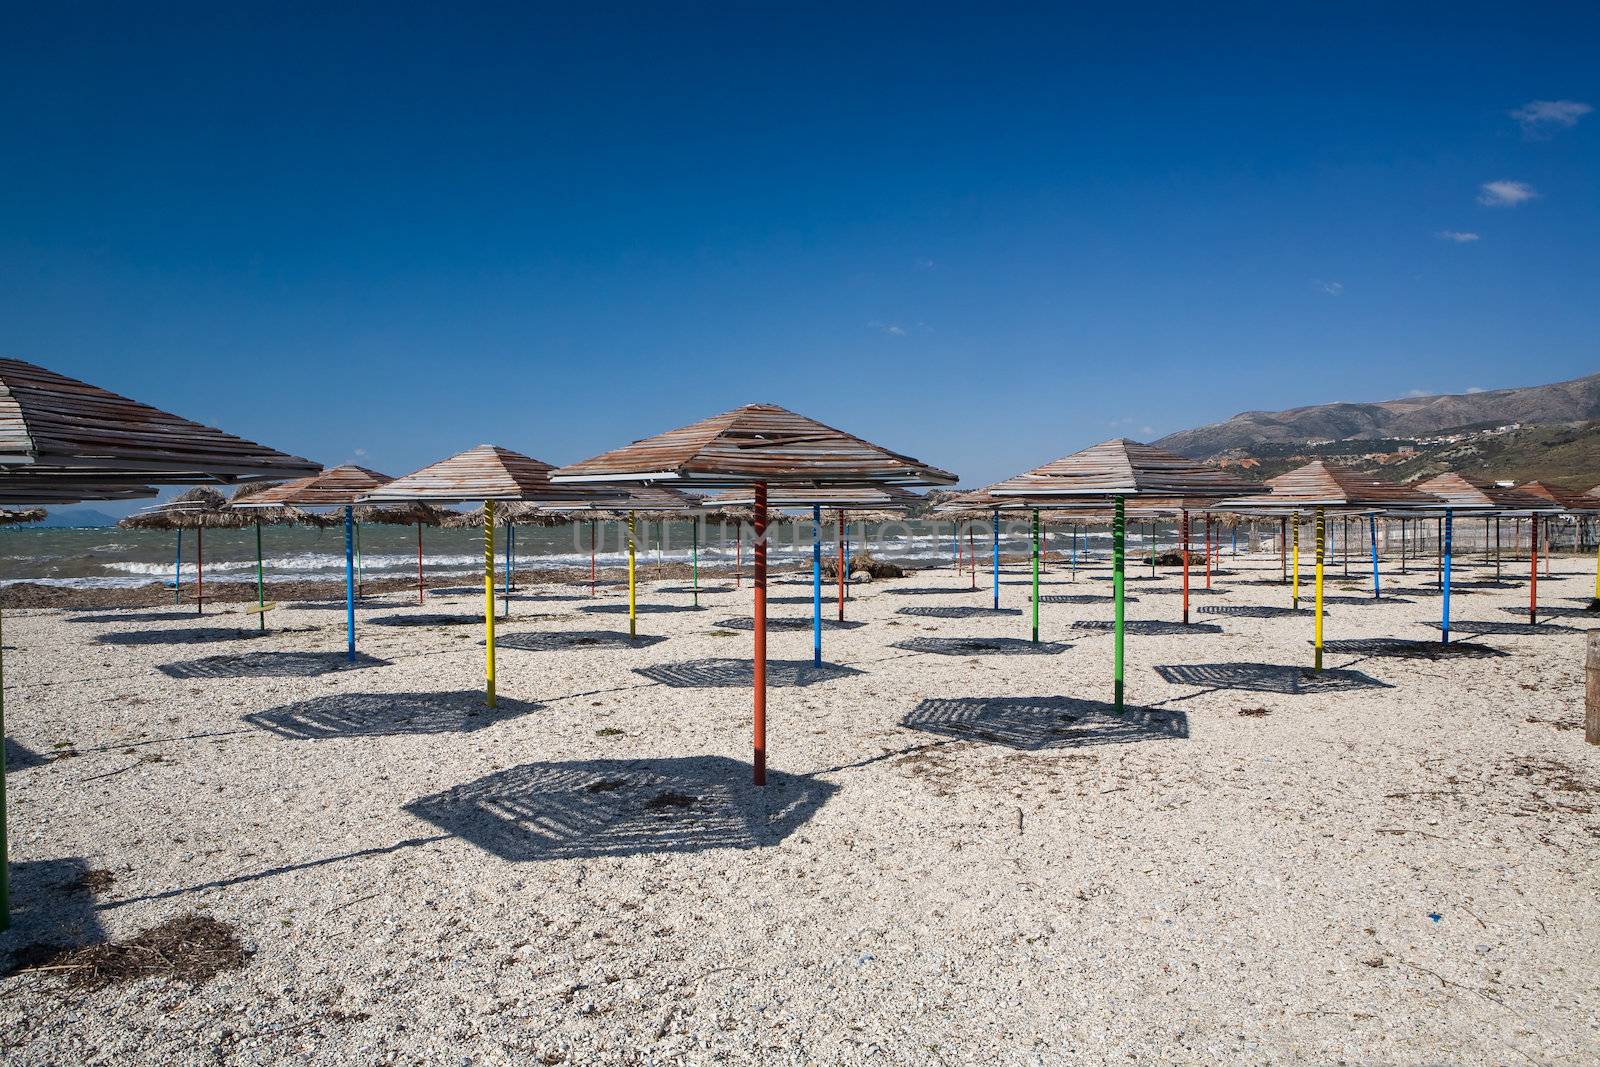 Set of beach umbrellas on sand making shadows under the blue clear sky in hot day